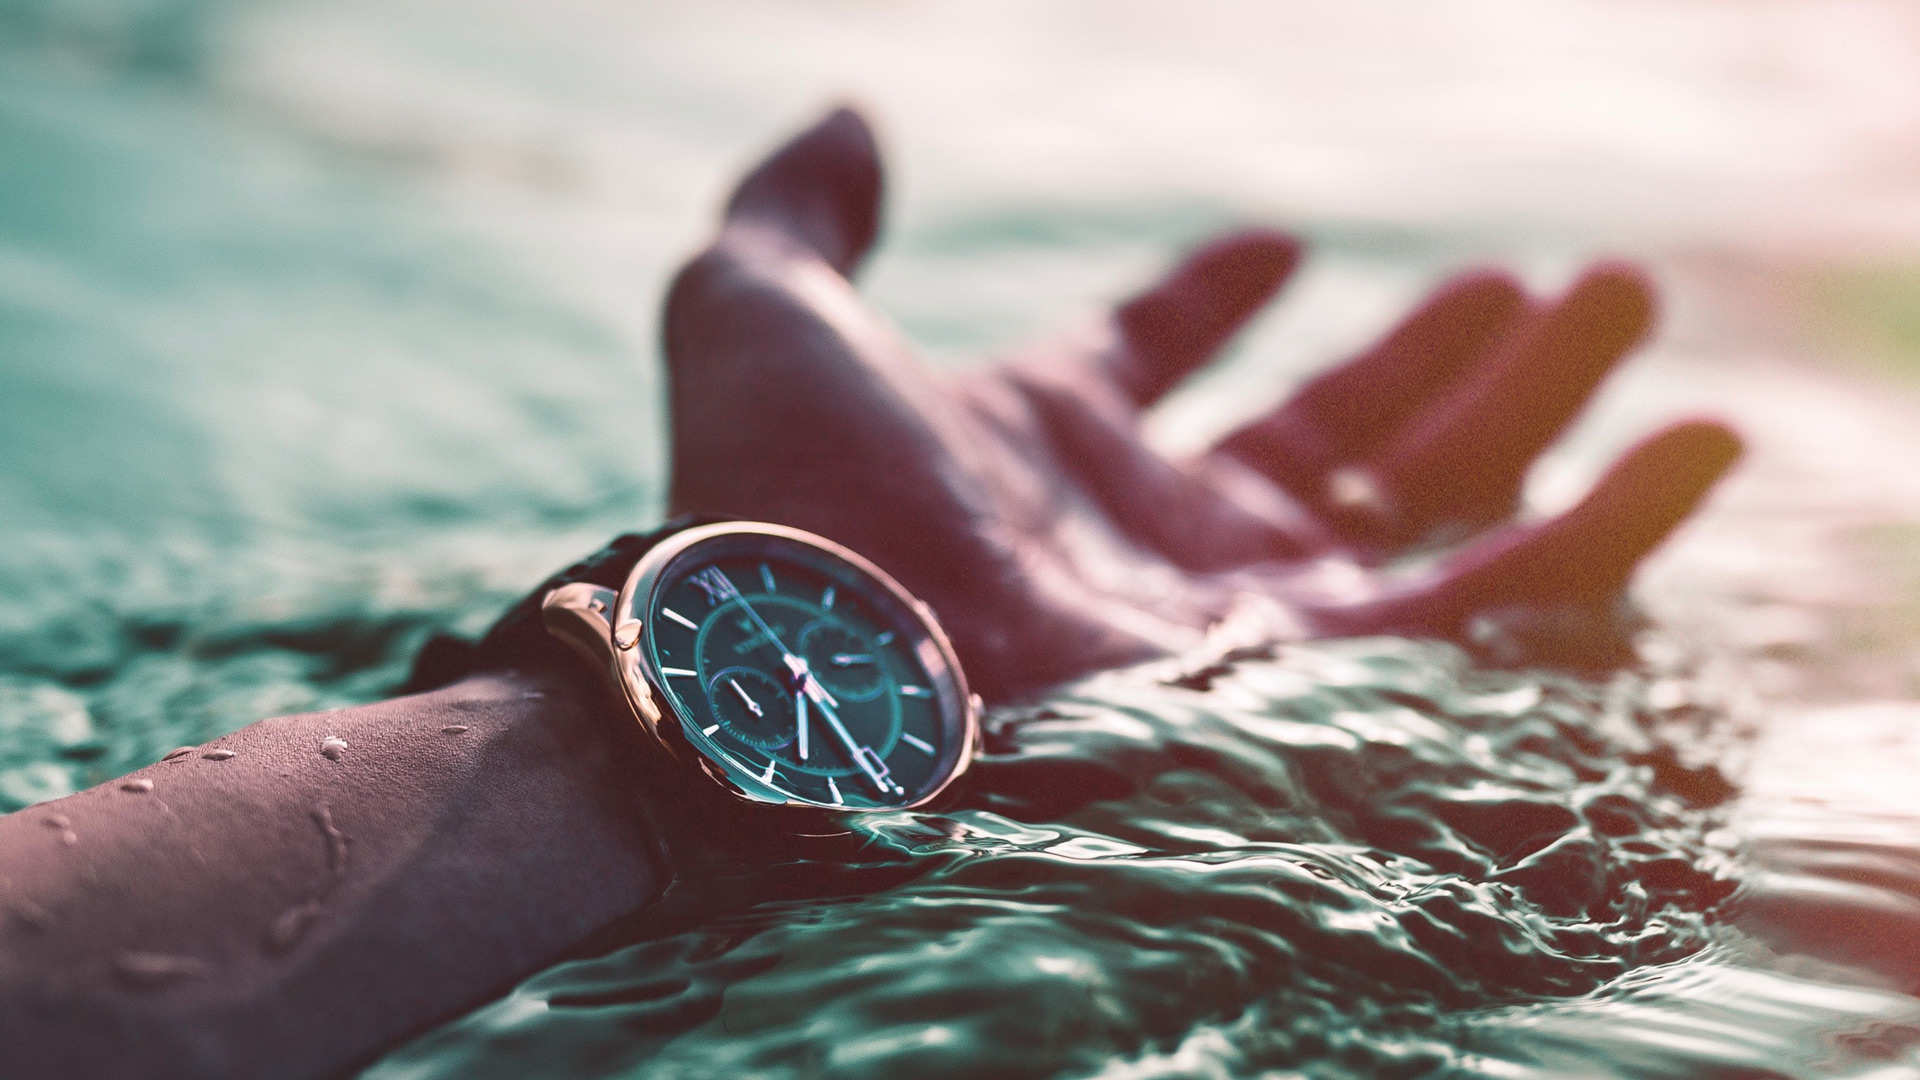 Arm stretched out to help wearing watch in the water (Alex Perez unsplash.com)